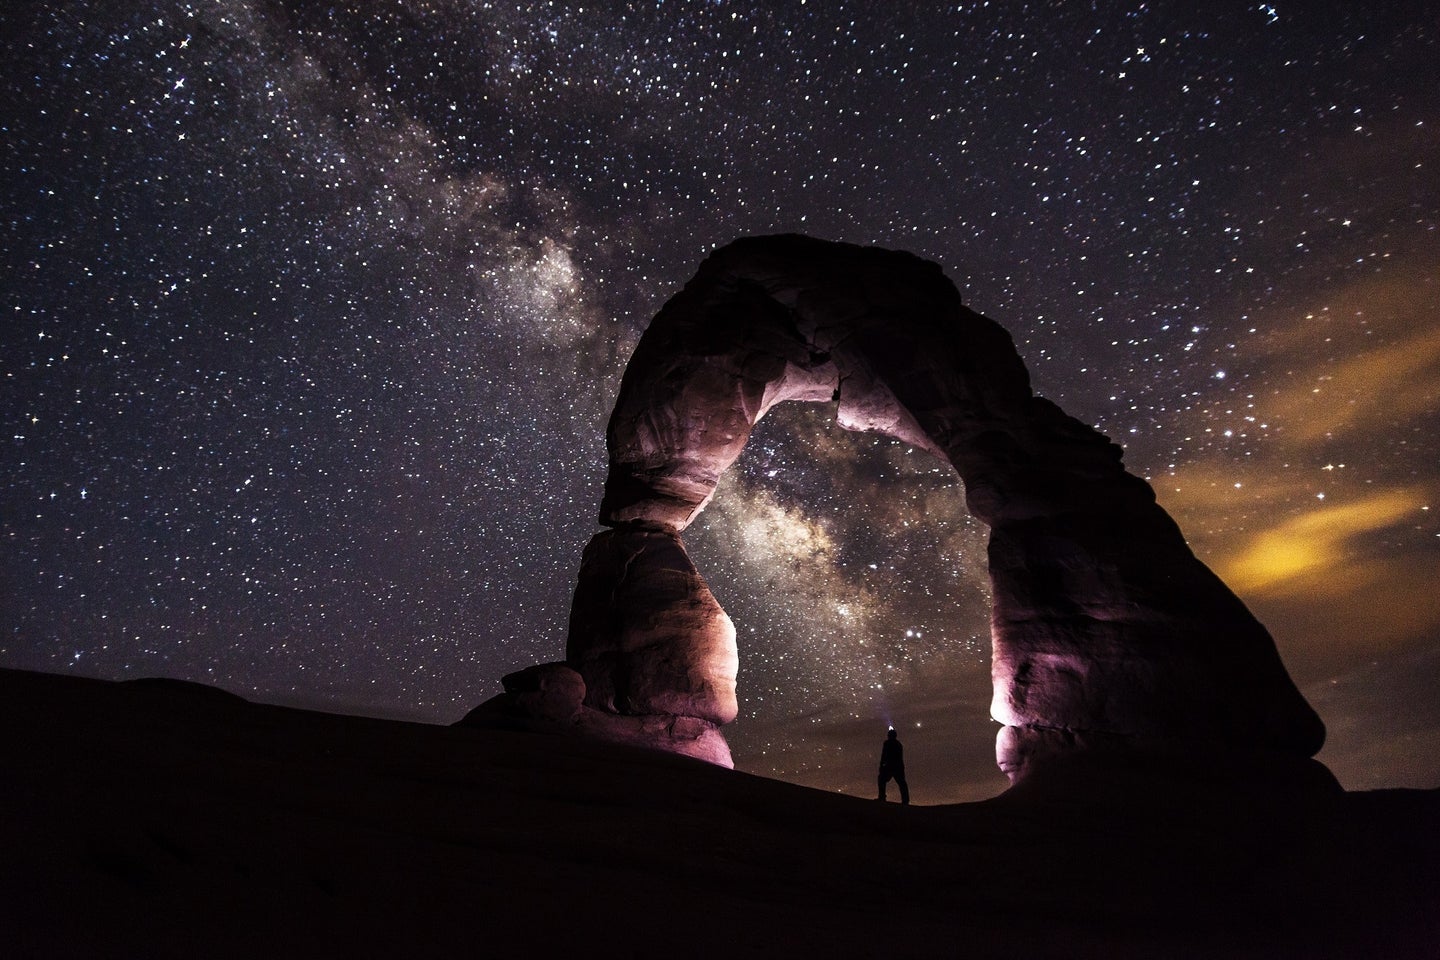 A person looks at the Milky Way